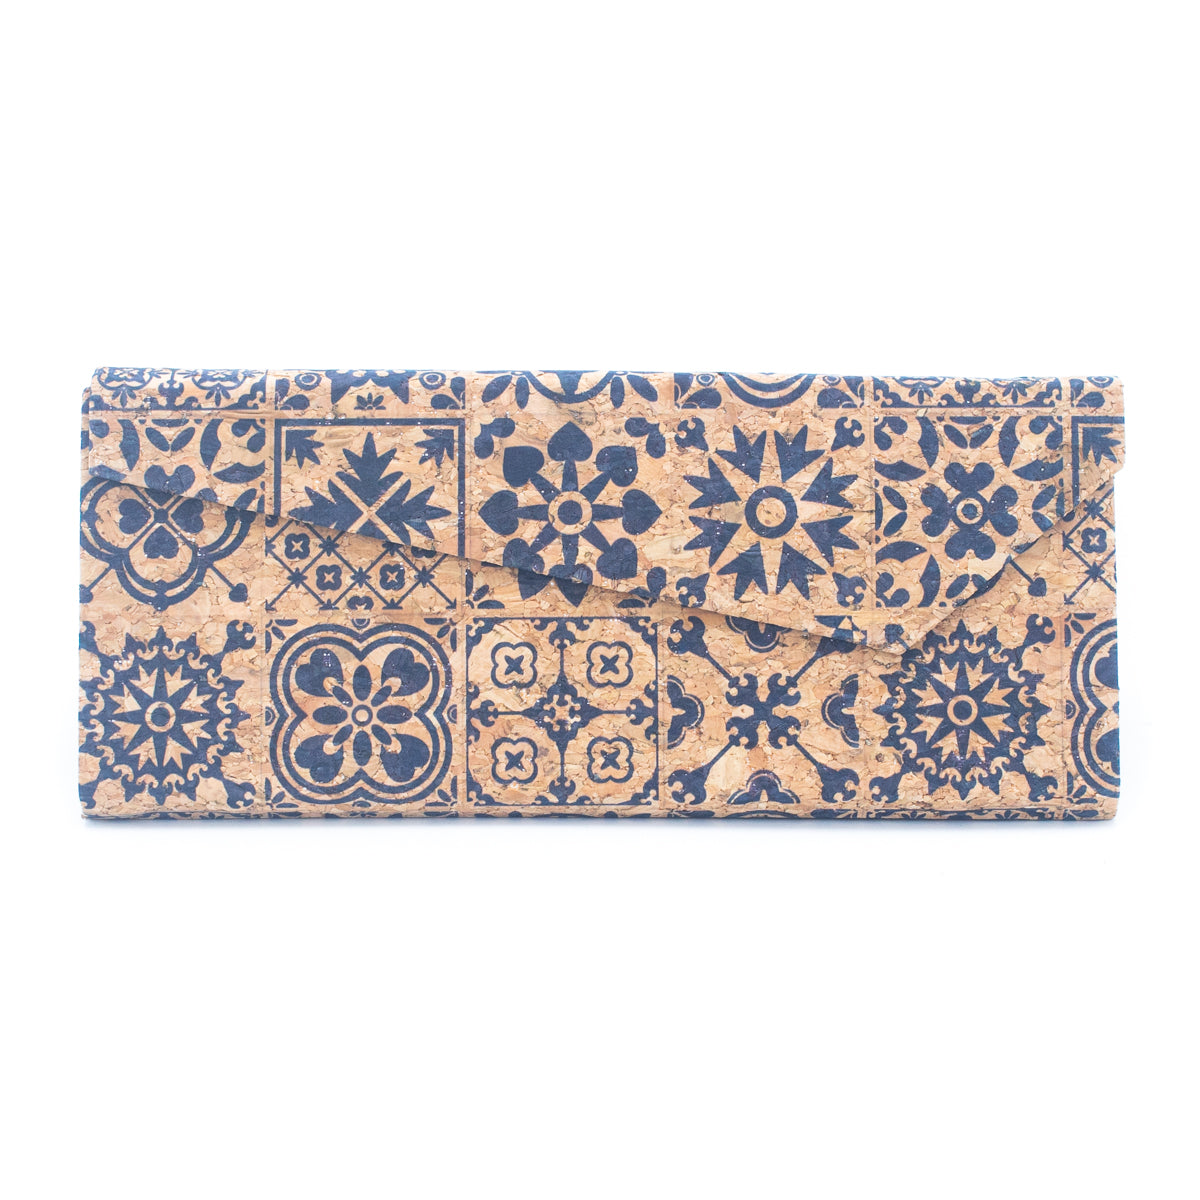 Foldable Triangular Cork Vegan Patterned Glasses Case  | THE CORK COLLECTION